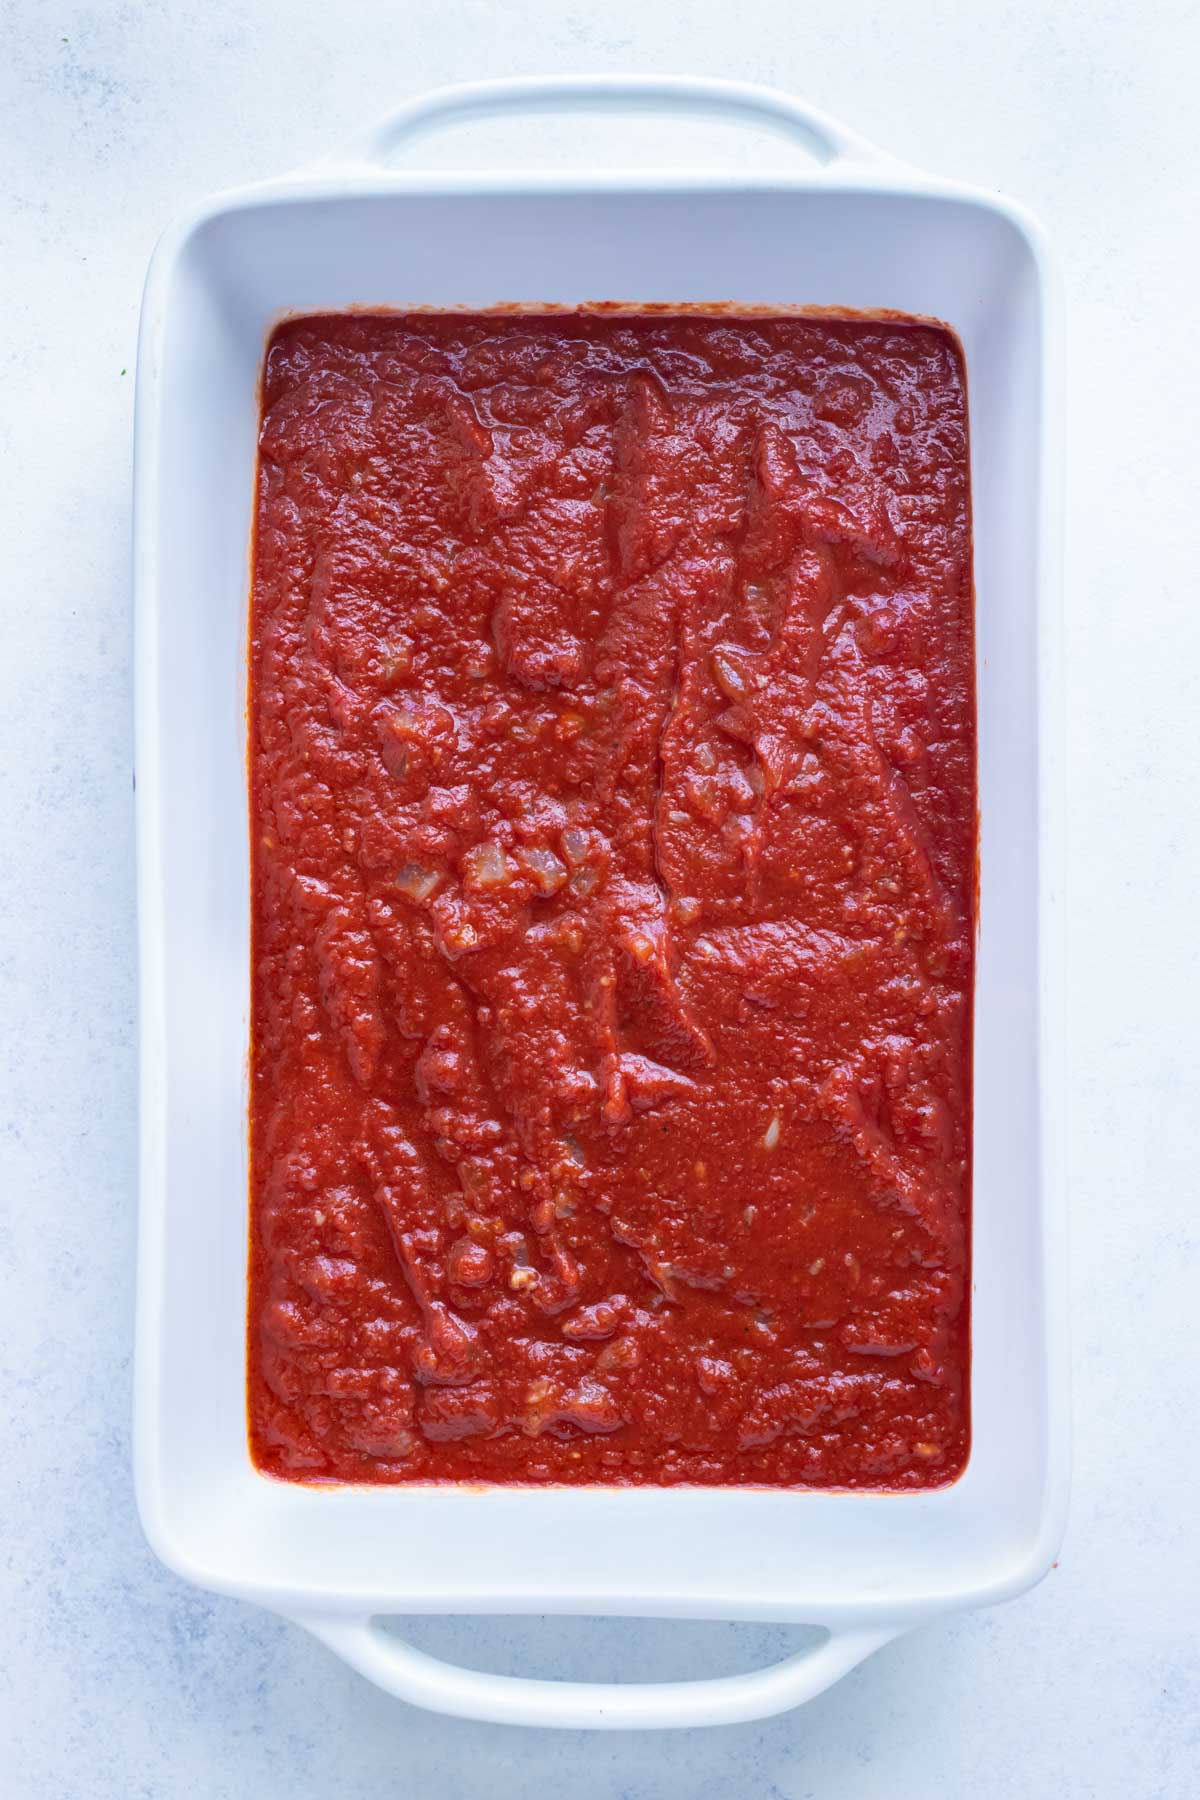 Sauce is layered in the bottom of the casserole dish.